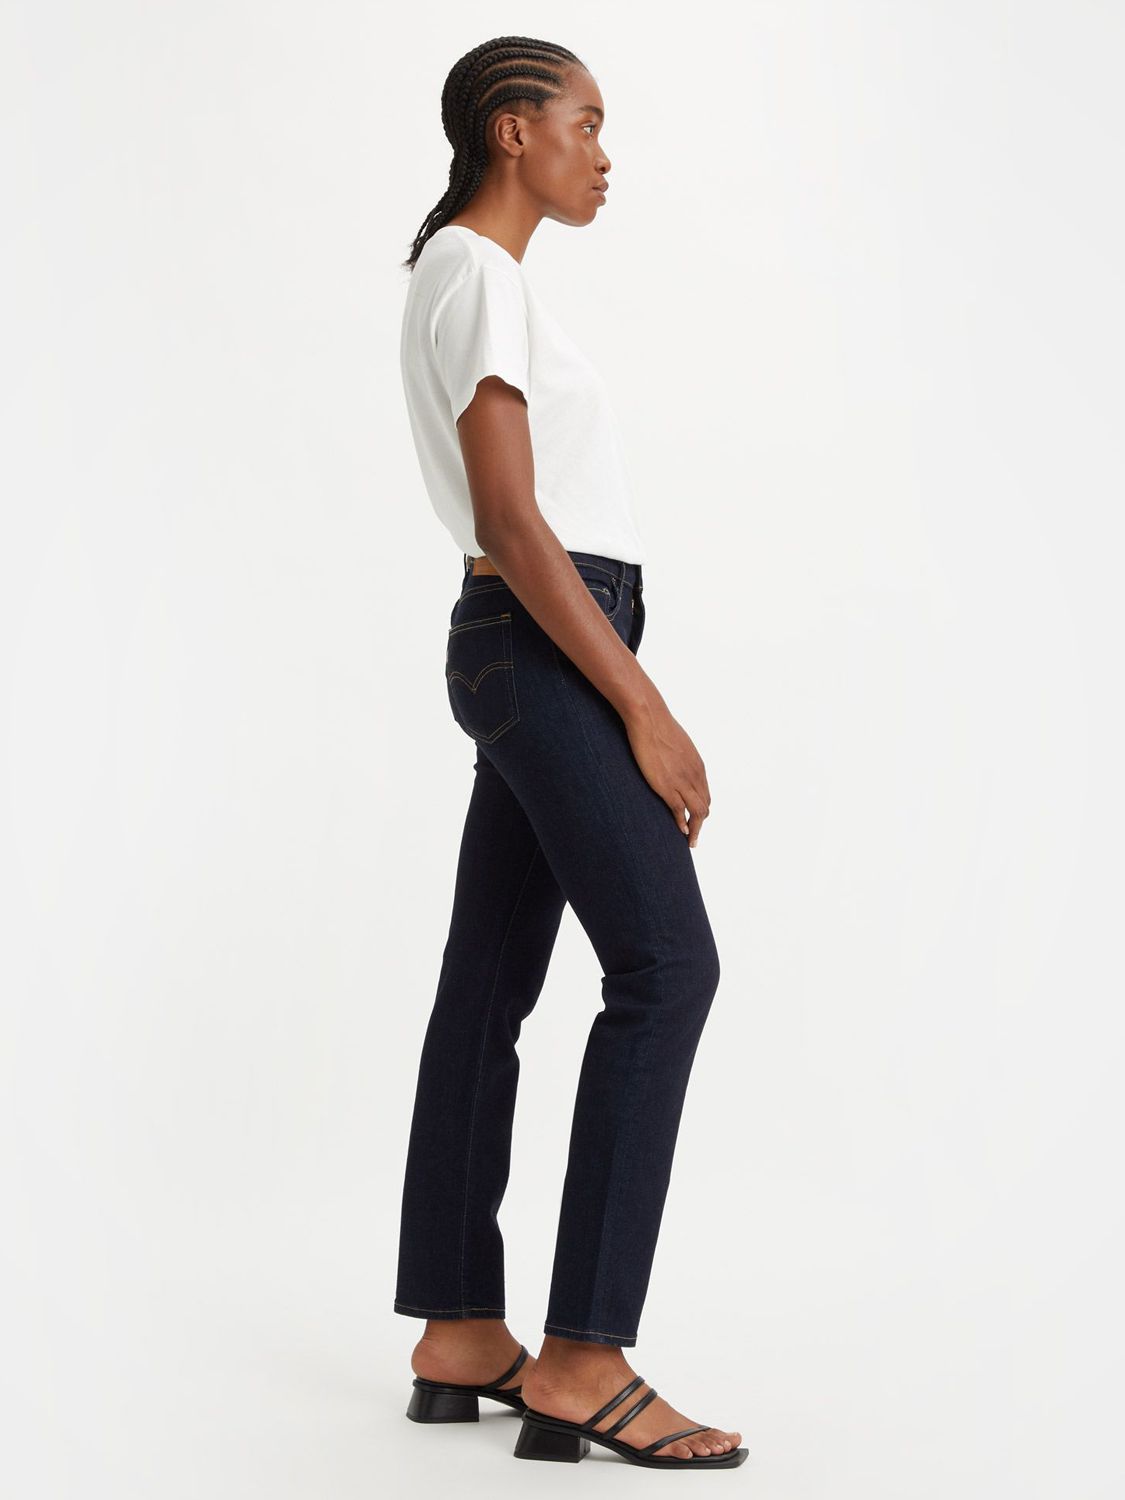 Buy Levi's 724 High Rise Straight Cut Jeans Online at johnlewis.com